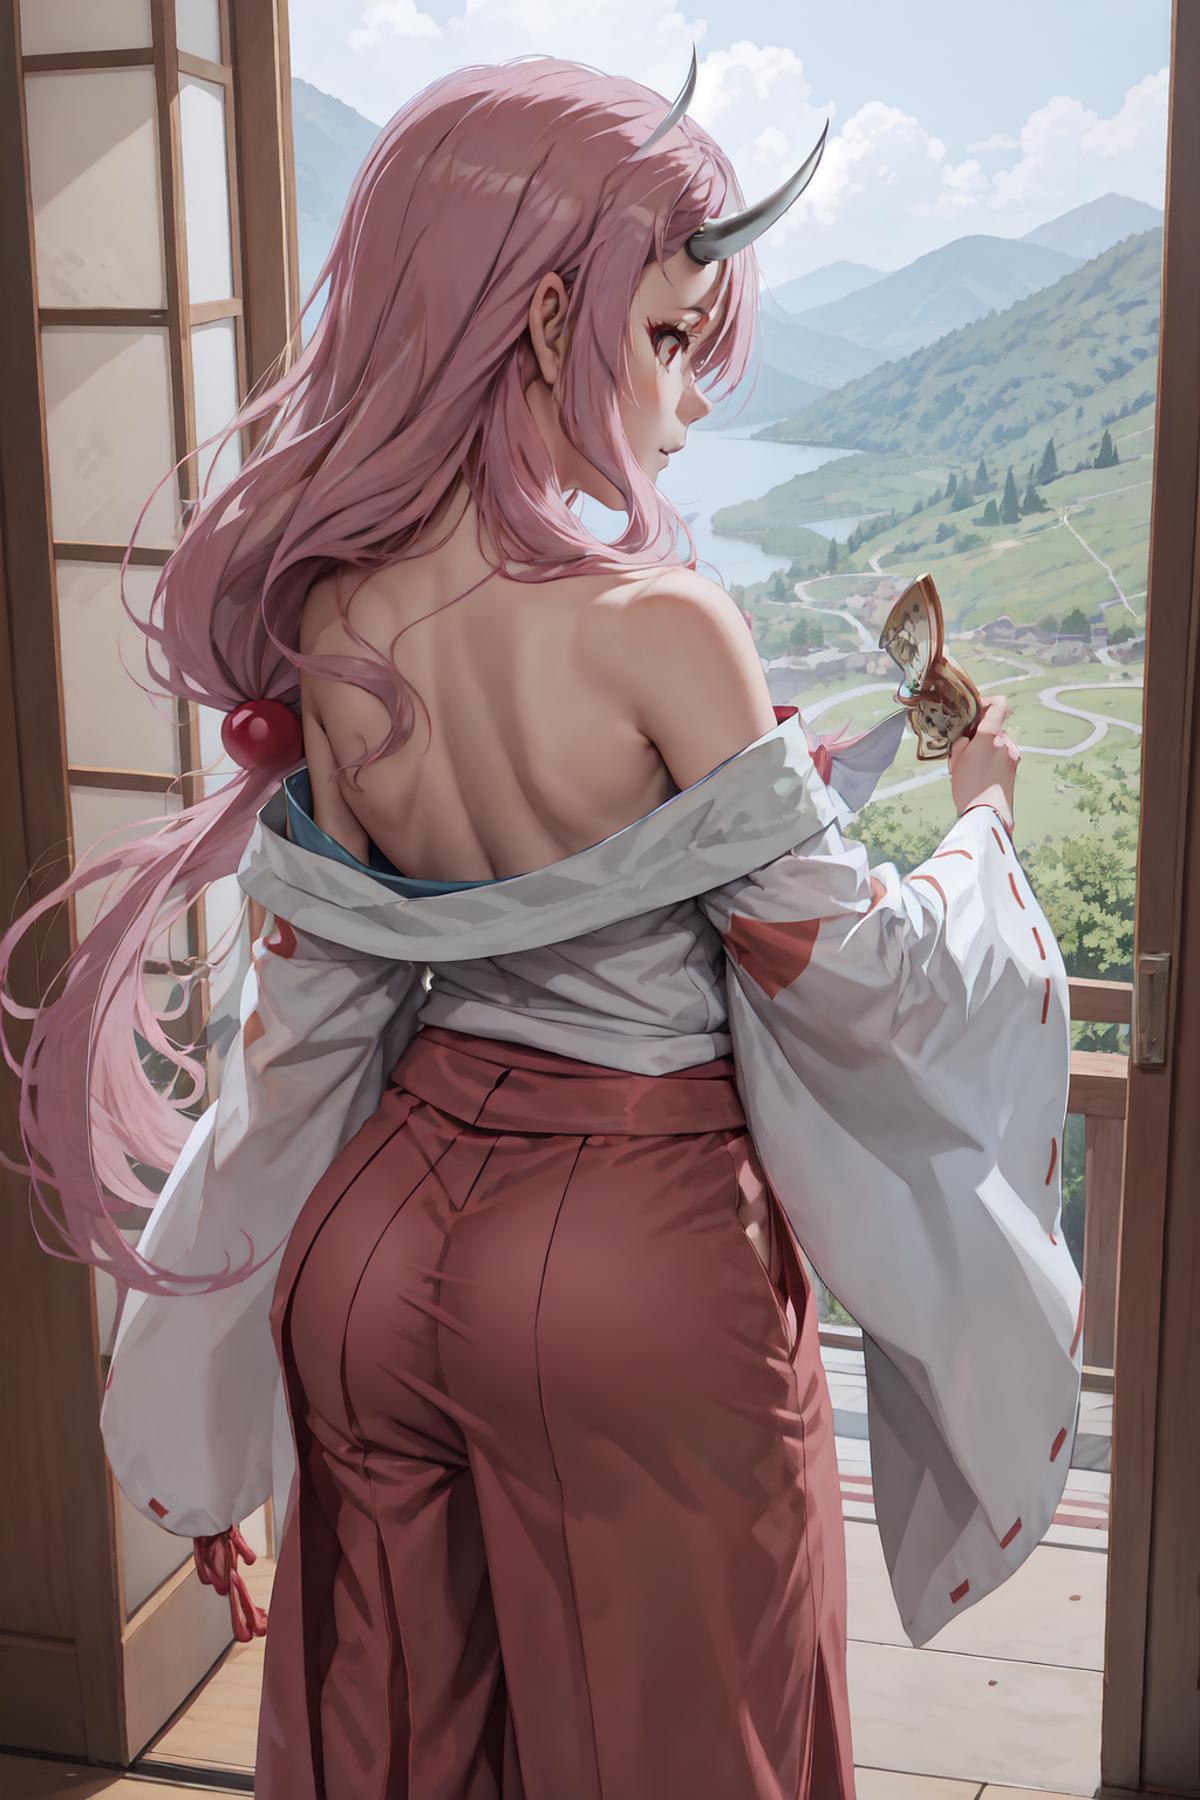 A woman with pink hair and pink pants stands by a window.